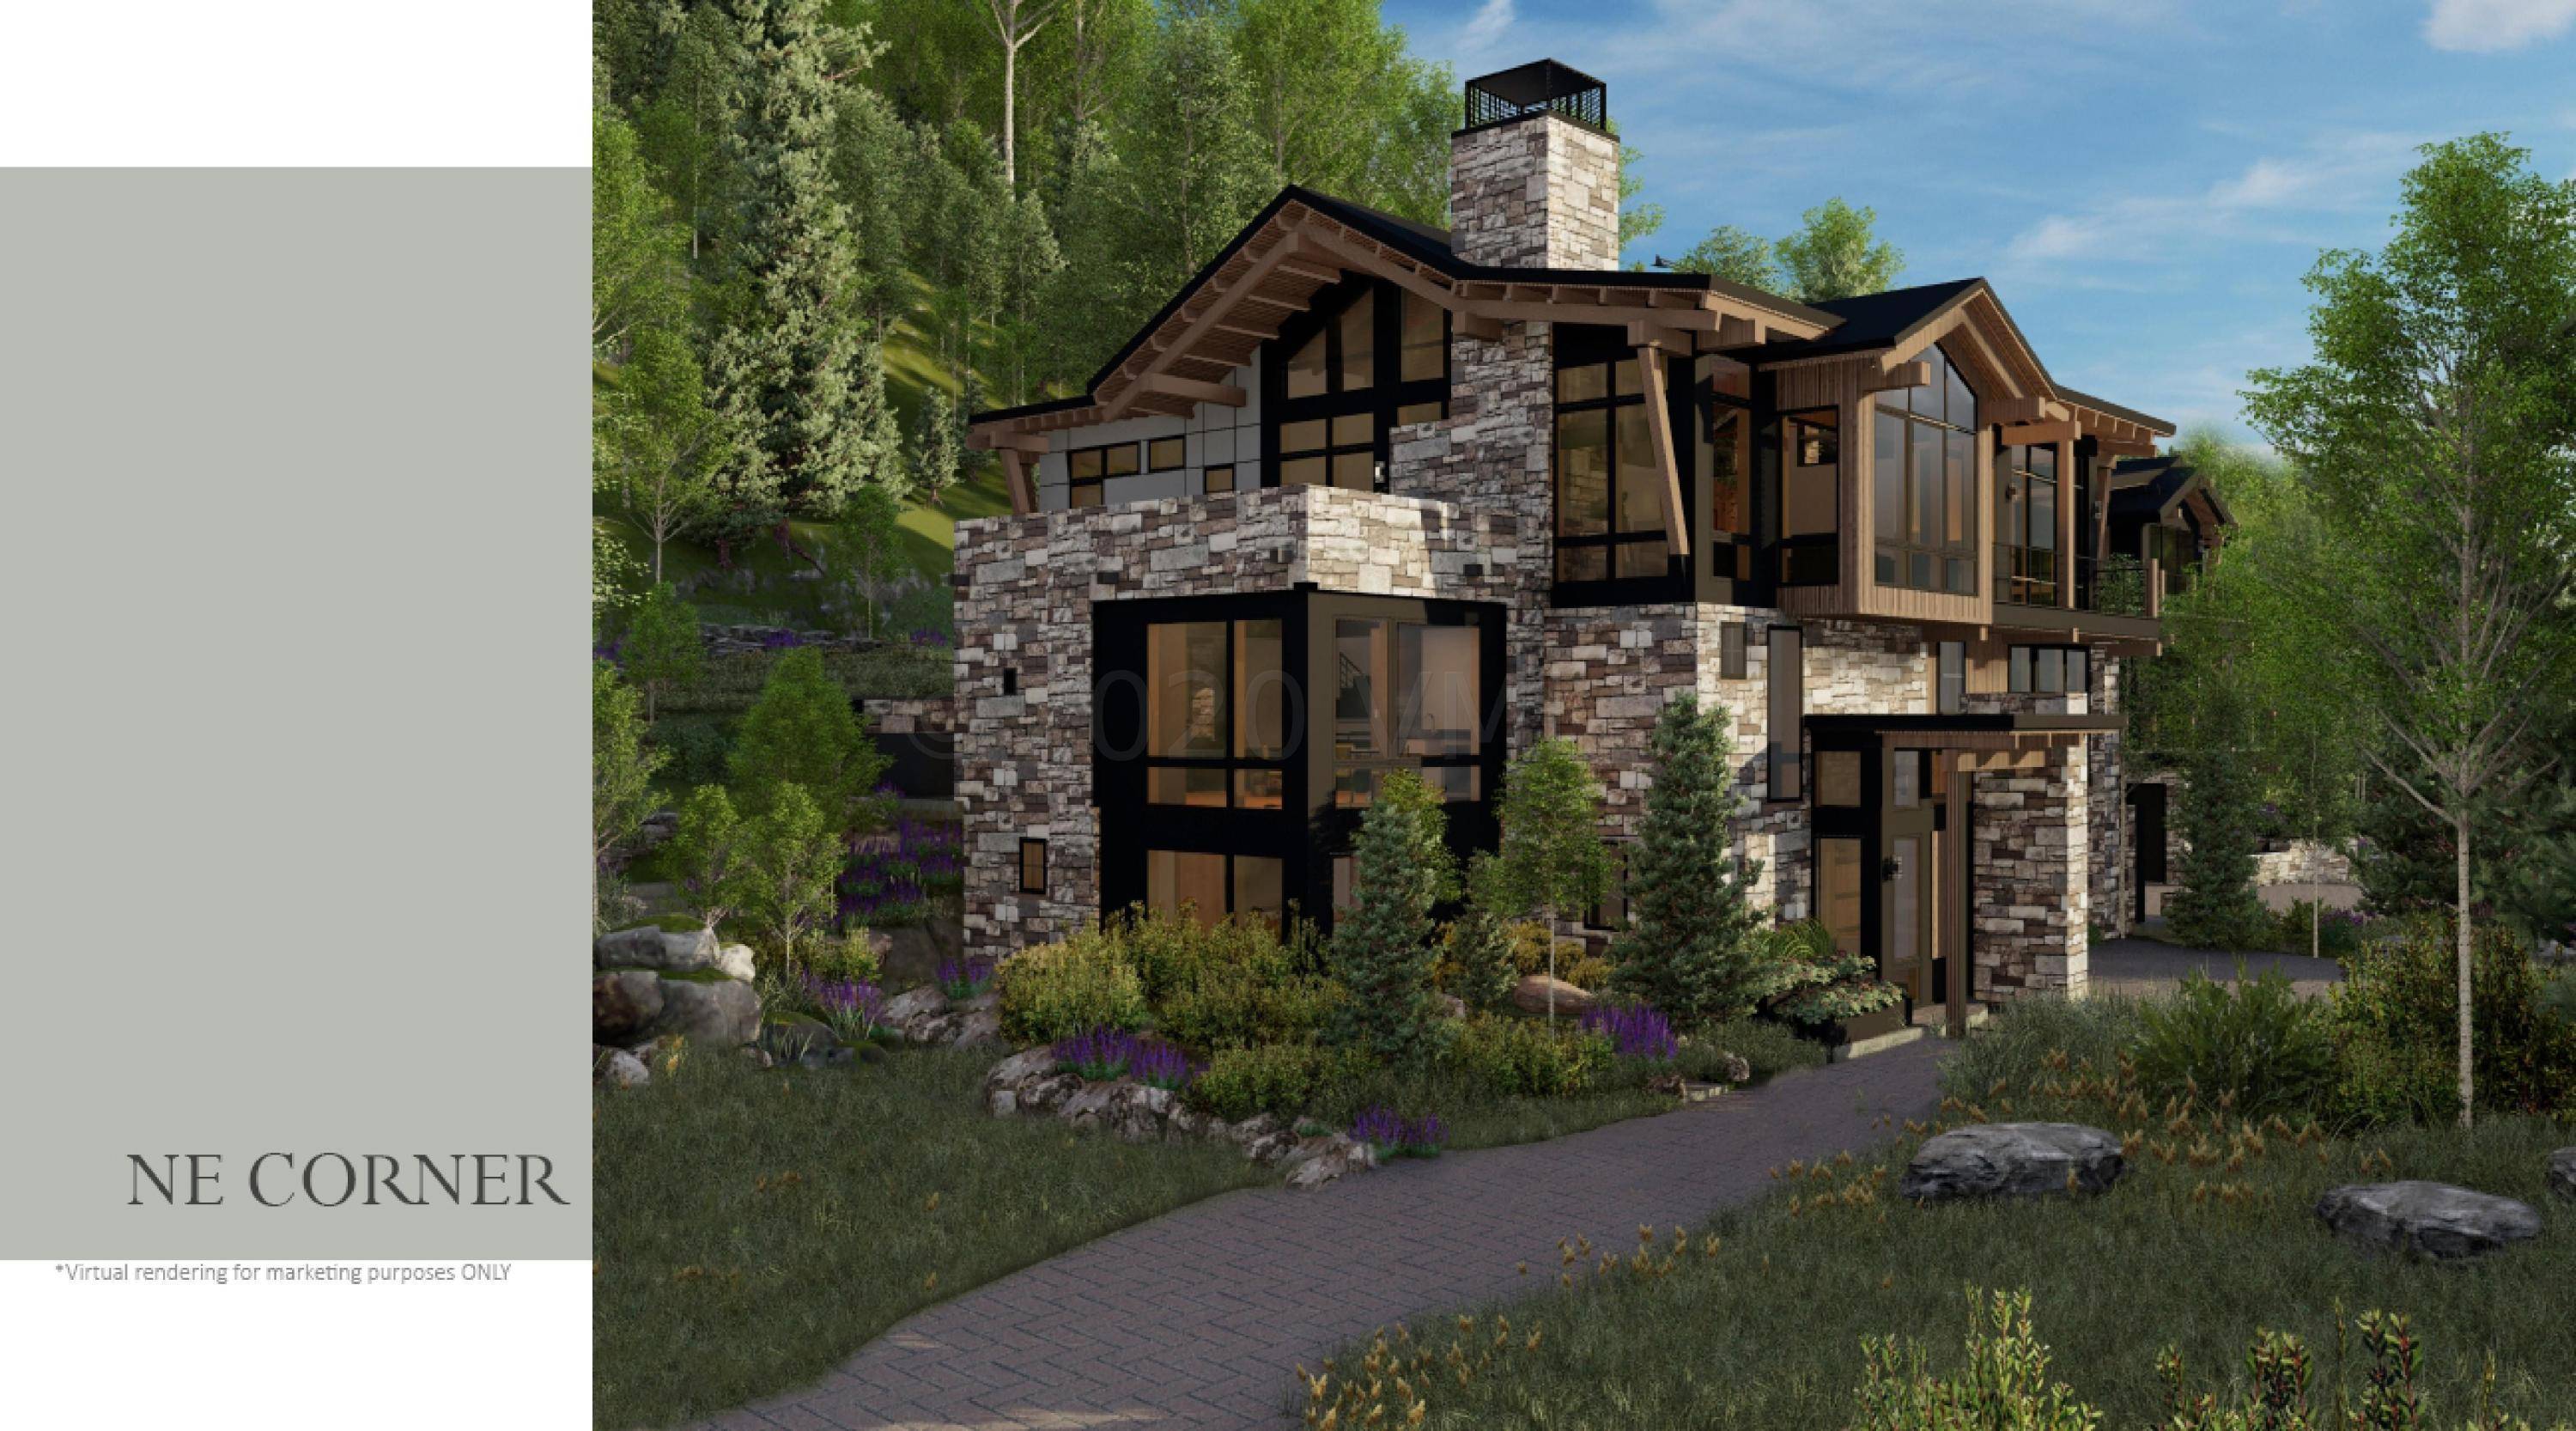 This stunning collaboration represents the best of the best in Vail architecture, design, building and real estate.